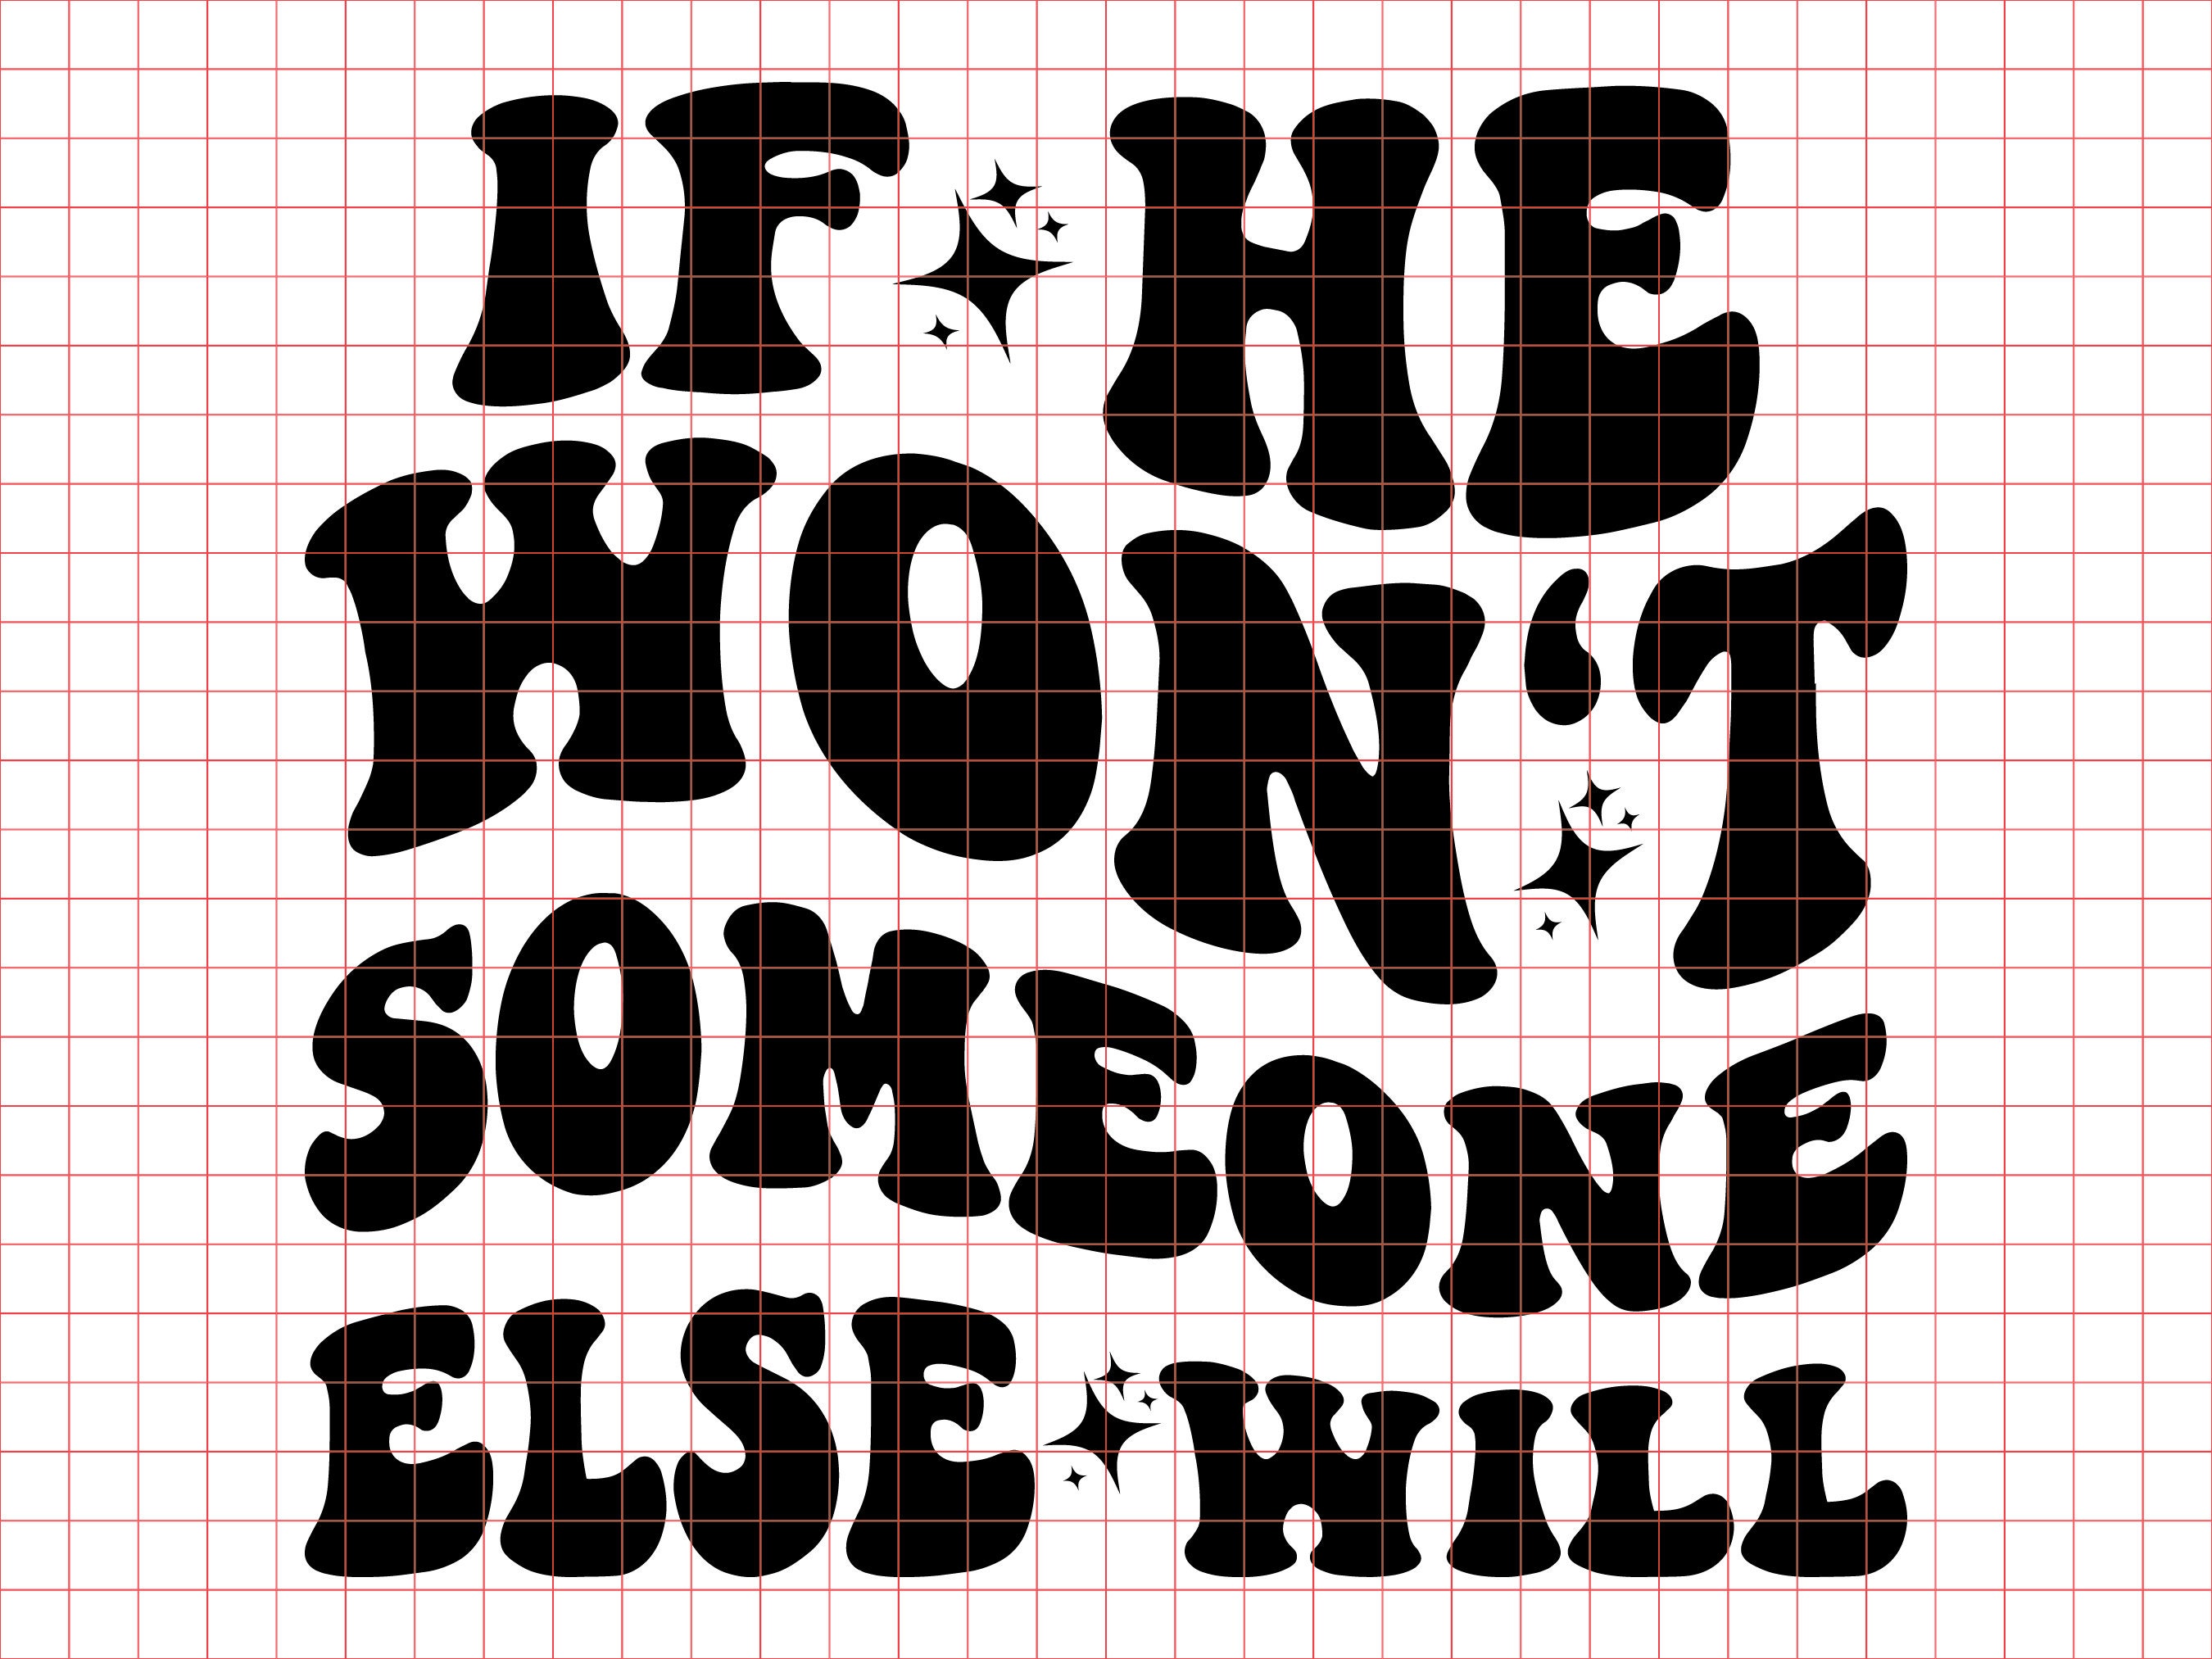 someone else will